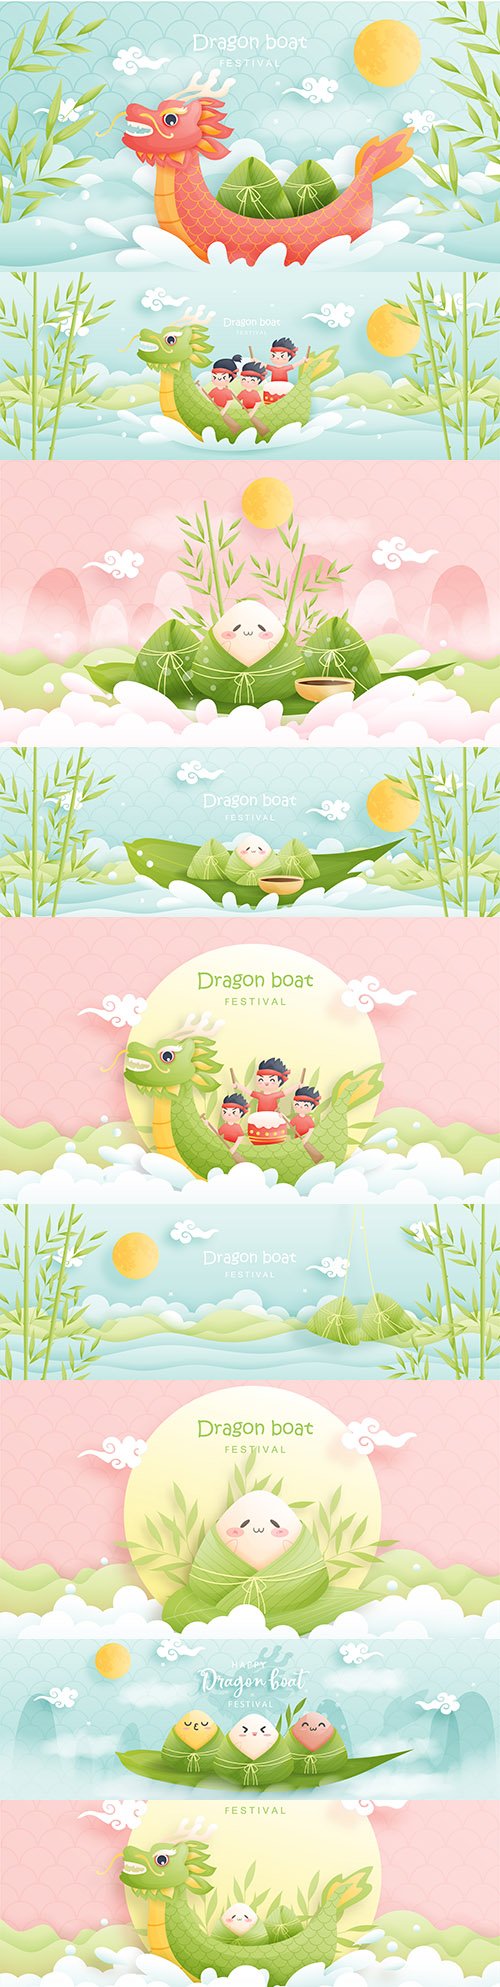 Chinese dragon boat festival with rice claws, cute illustration